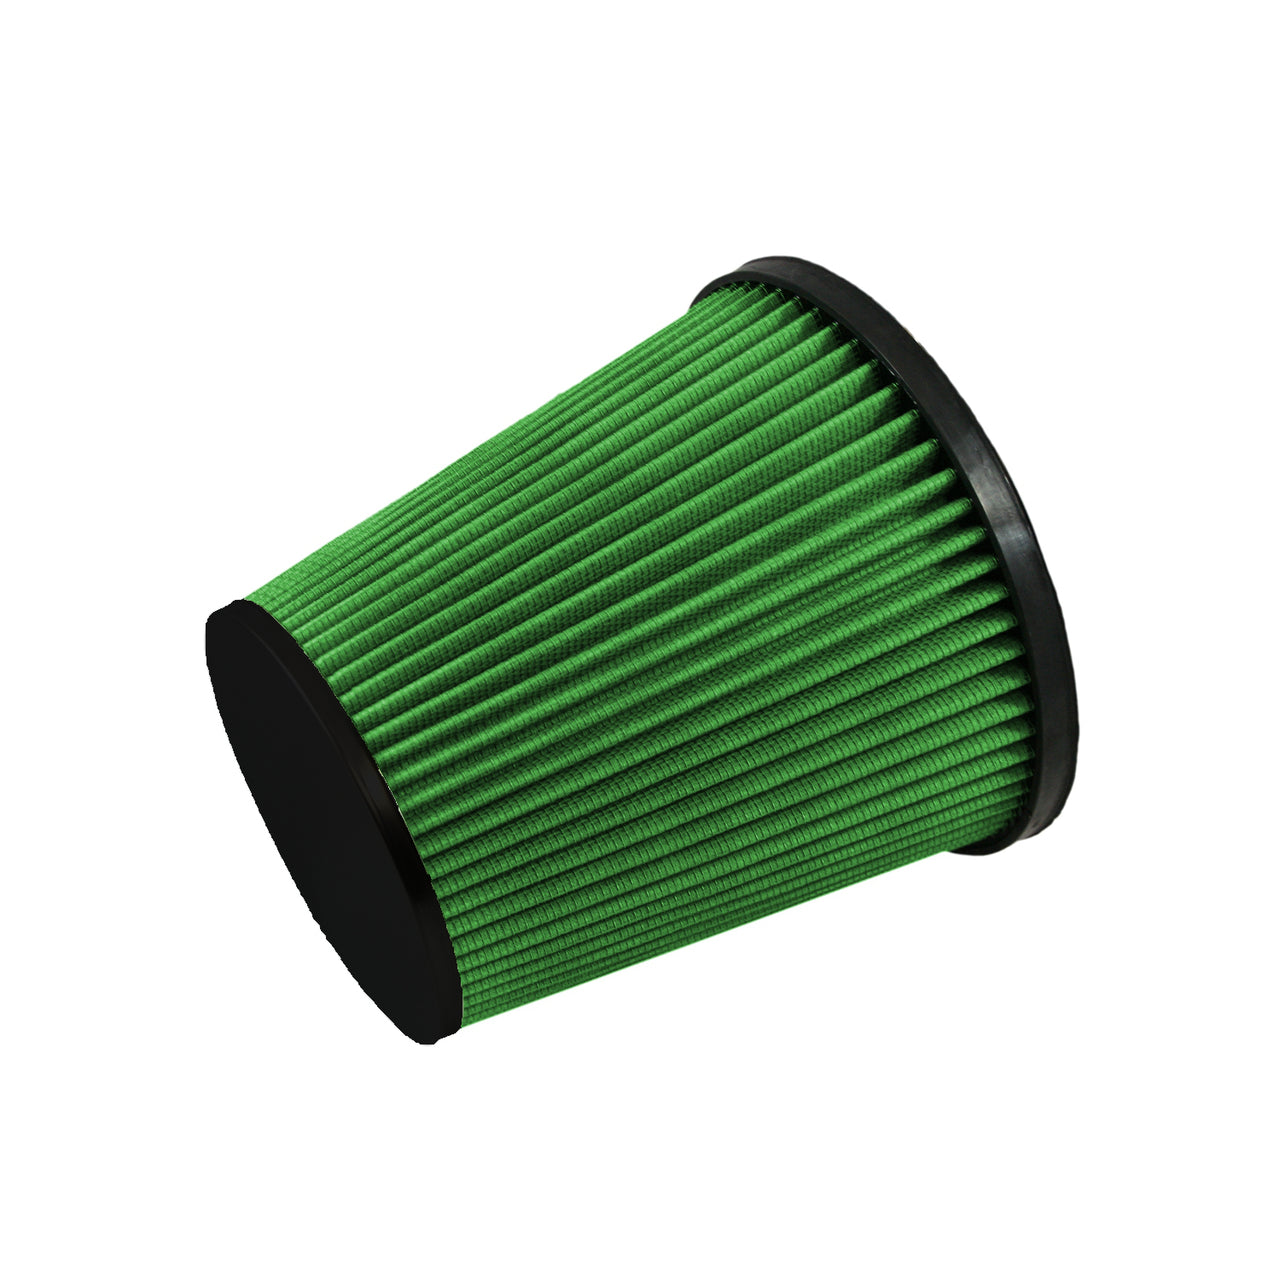 Green Filter Cone Filter - ID 5in. / Base 7.8in. / Top 5.5in. / H 7.8in.